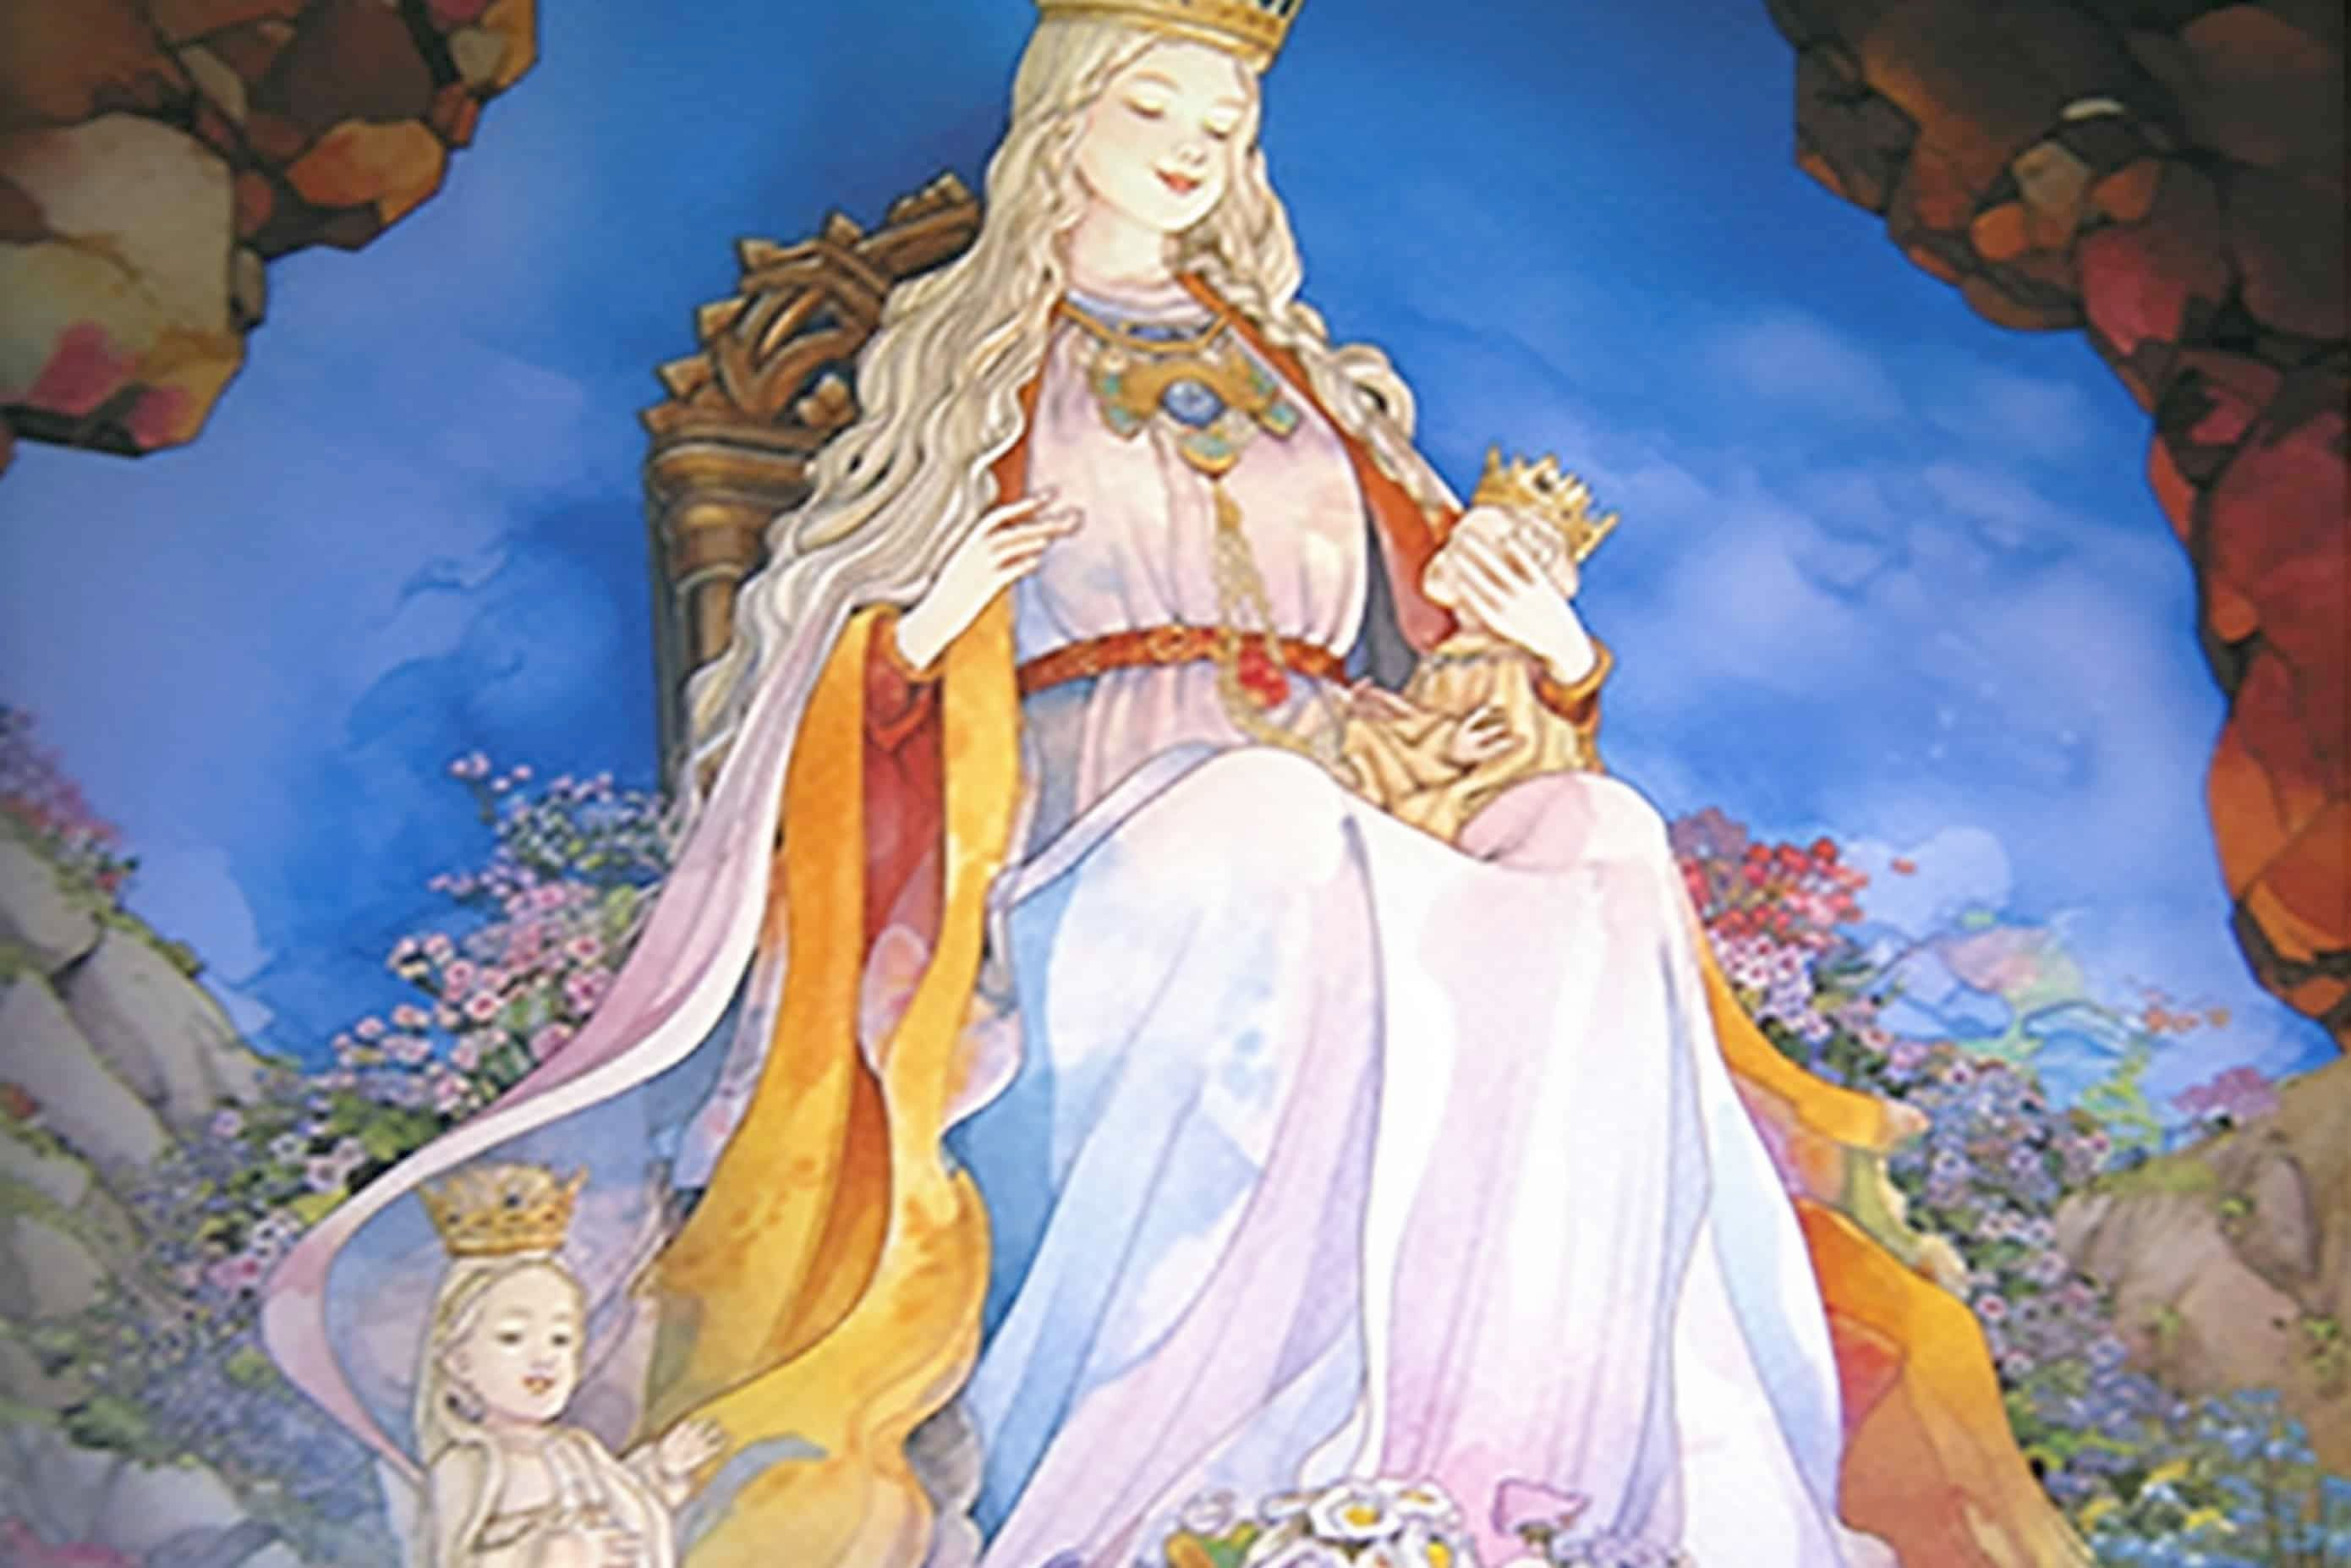 Our Lady of Coromoto image